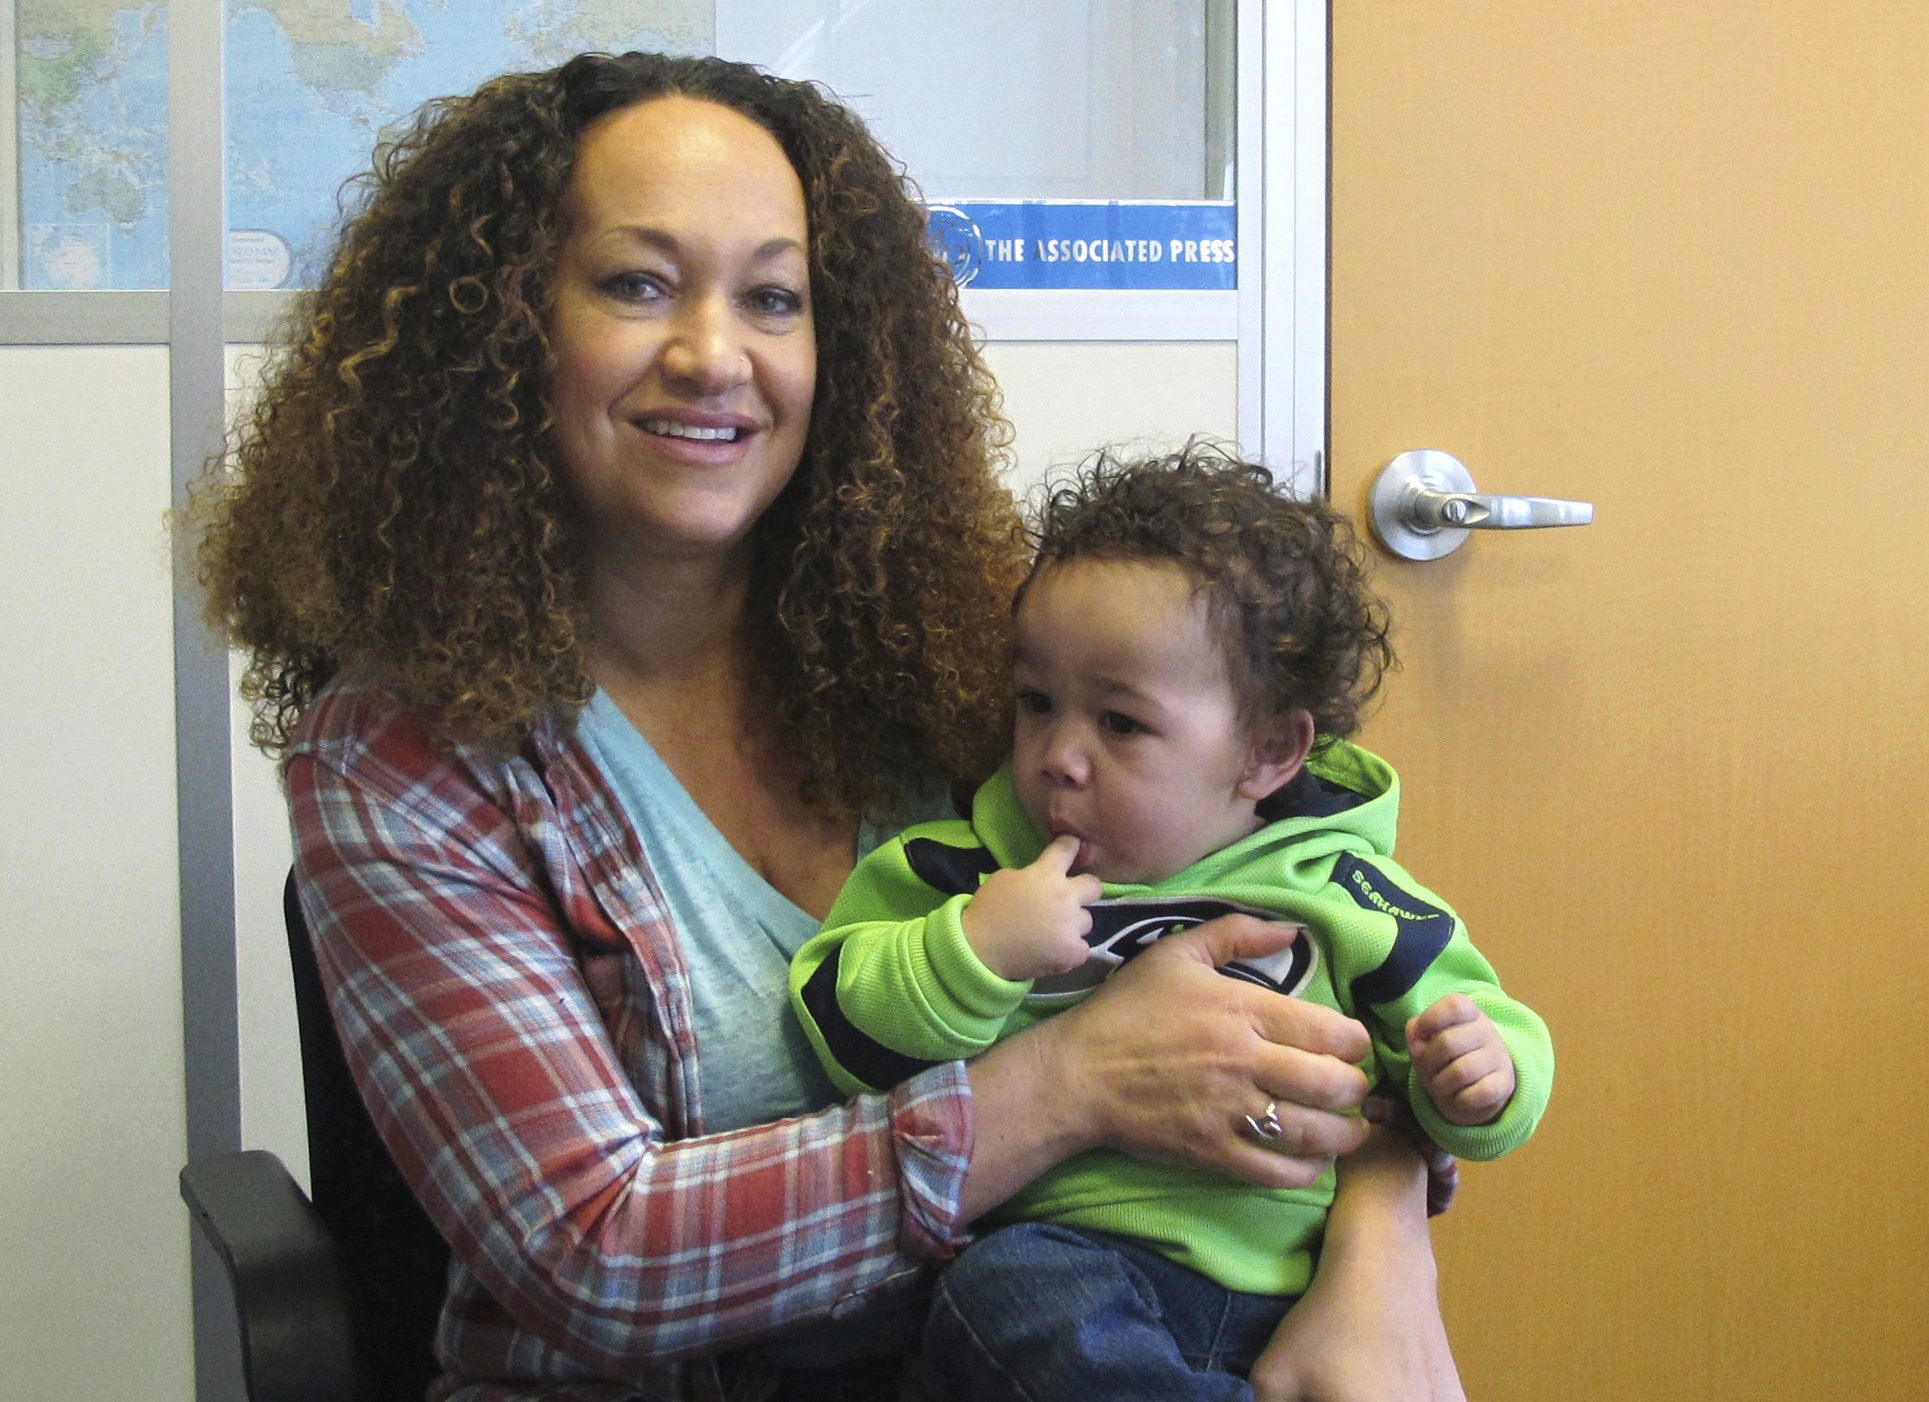 Rachel Dolezal poses for a photo with her son, Langston in the bureau of the Associated Press in Spokane, Wash. on March 20, 2017.